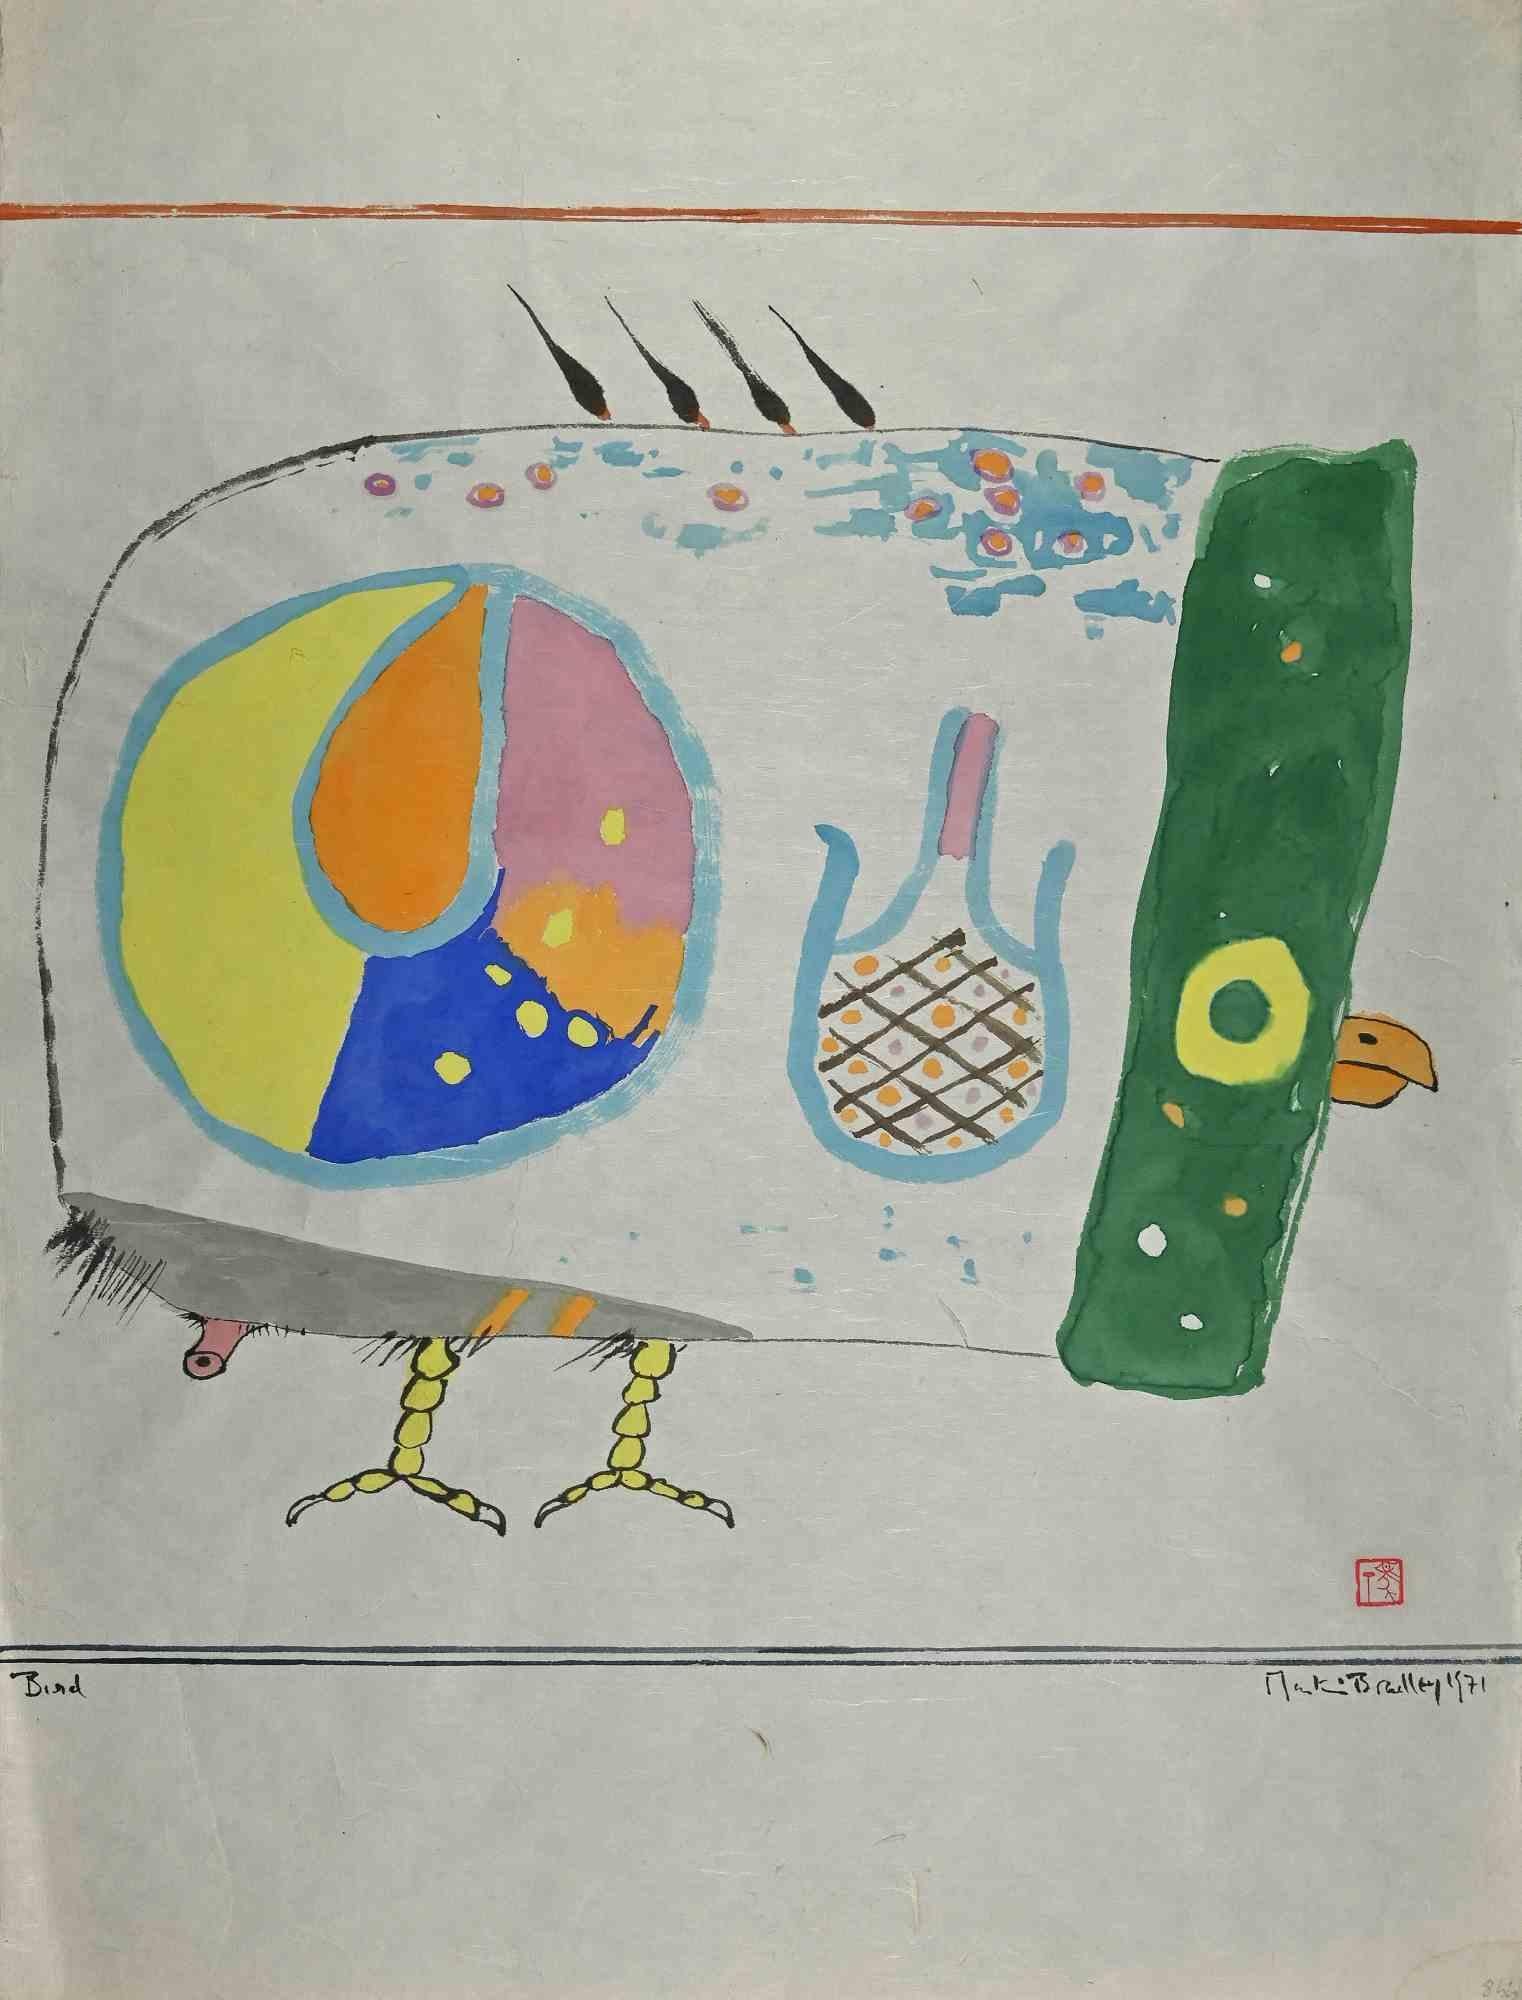 Bird is an artwork realized by the English artist Martin Bradley in 1971.

Watercolor on Japanese paper,  titled "Bird" on the left corner, hand-signed and dated on the lower right corner "Martin Bradley 1971 ".

Good conditions.

Martin Bradley